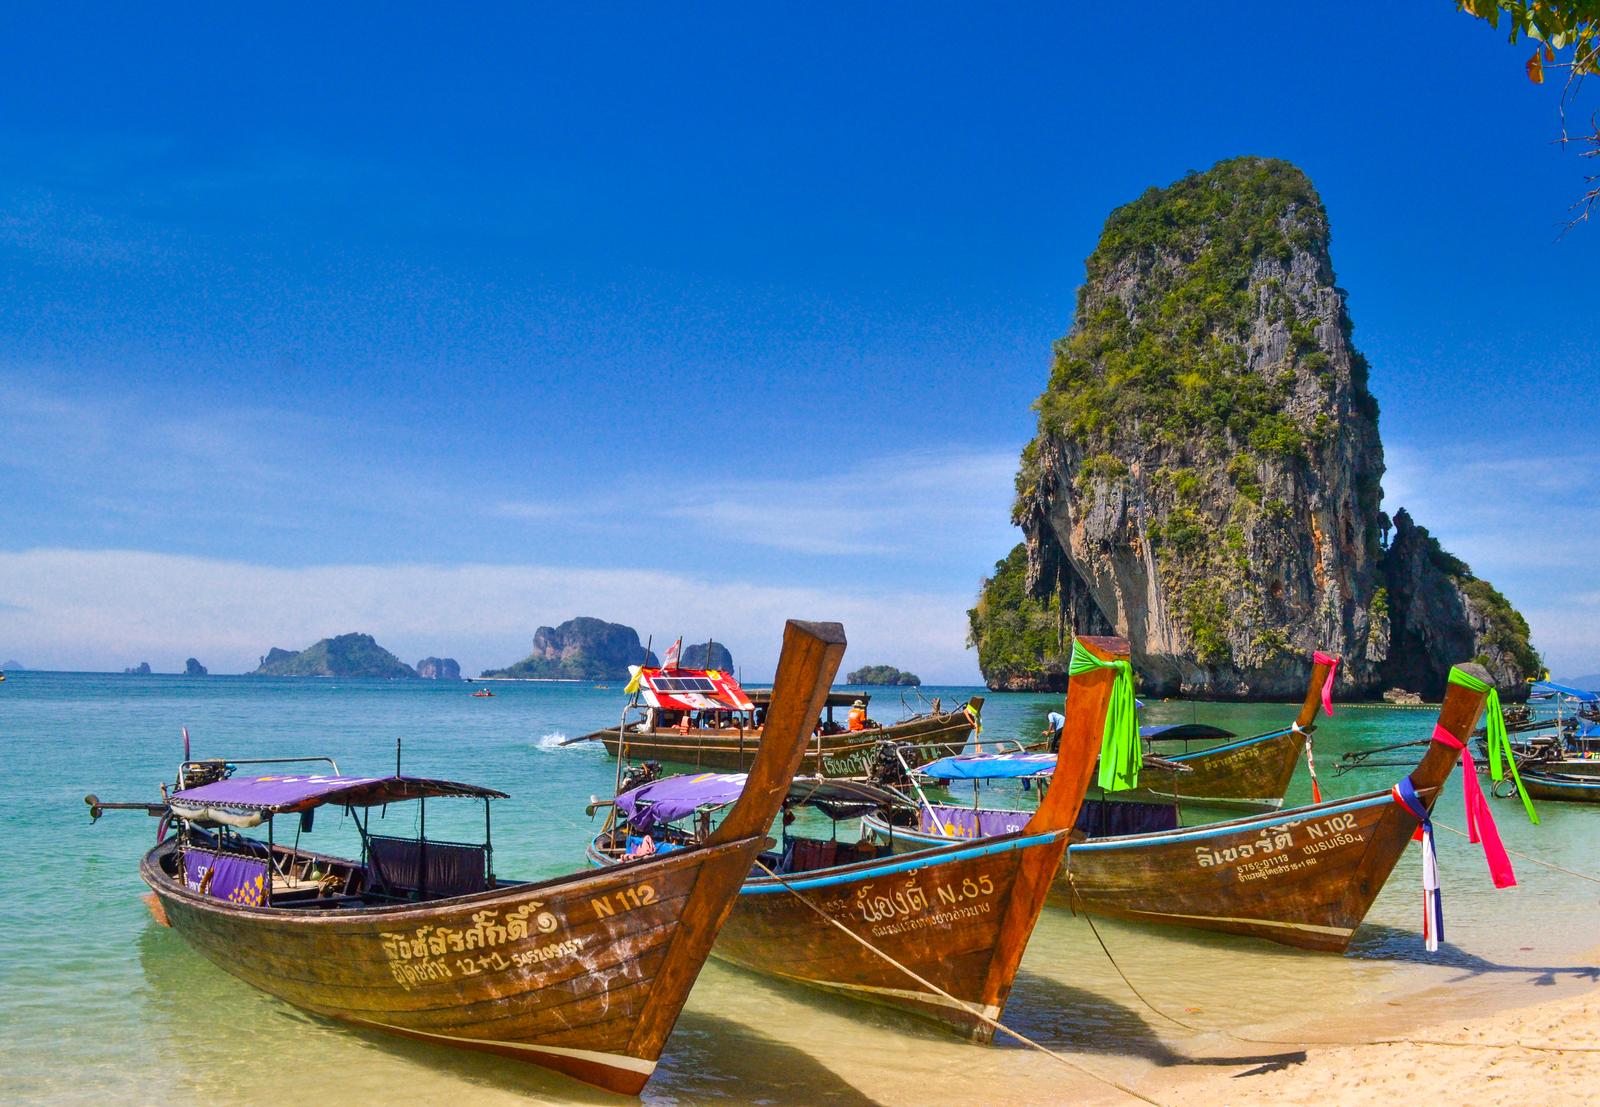 Are You a World Traveler? Test Your Knowledge by Matching These Majestic Natural Sites to Their Countries! Thailand